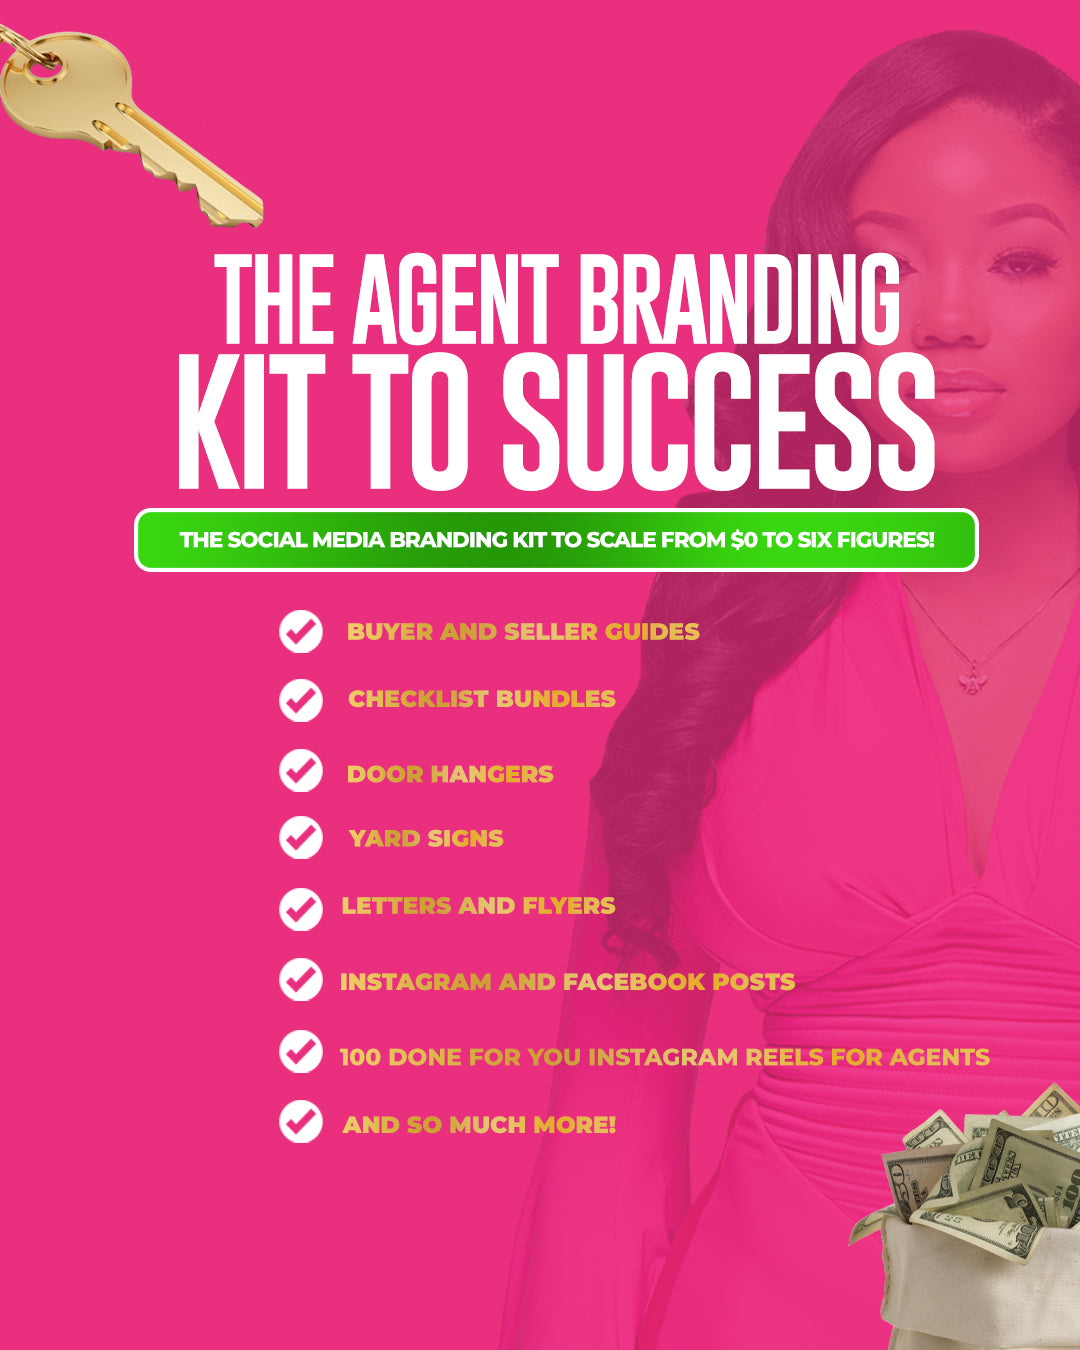 THE AGENT BRANDING KIT TO SUCCESS